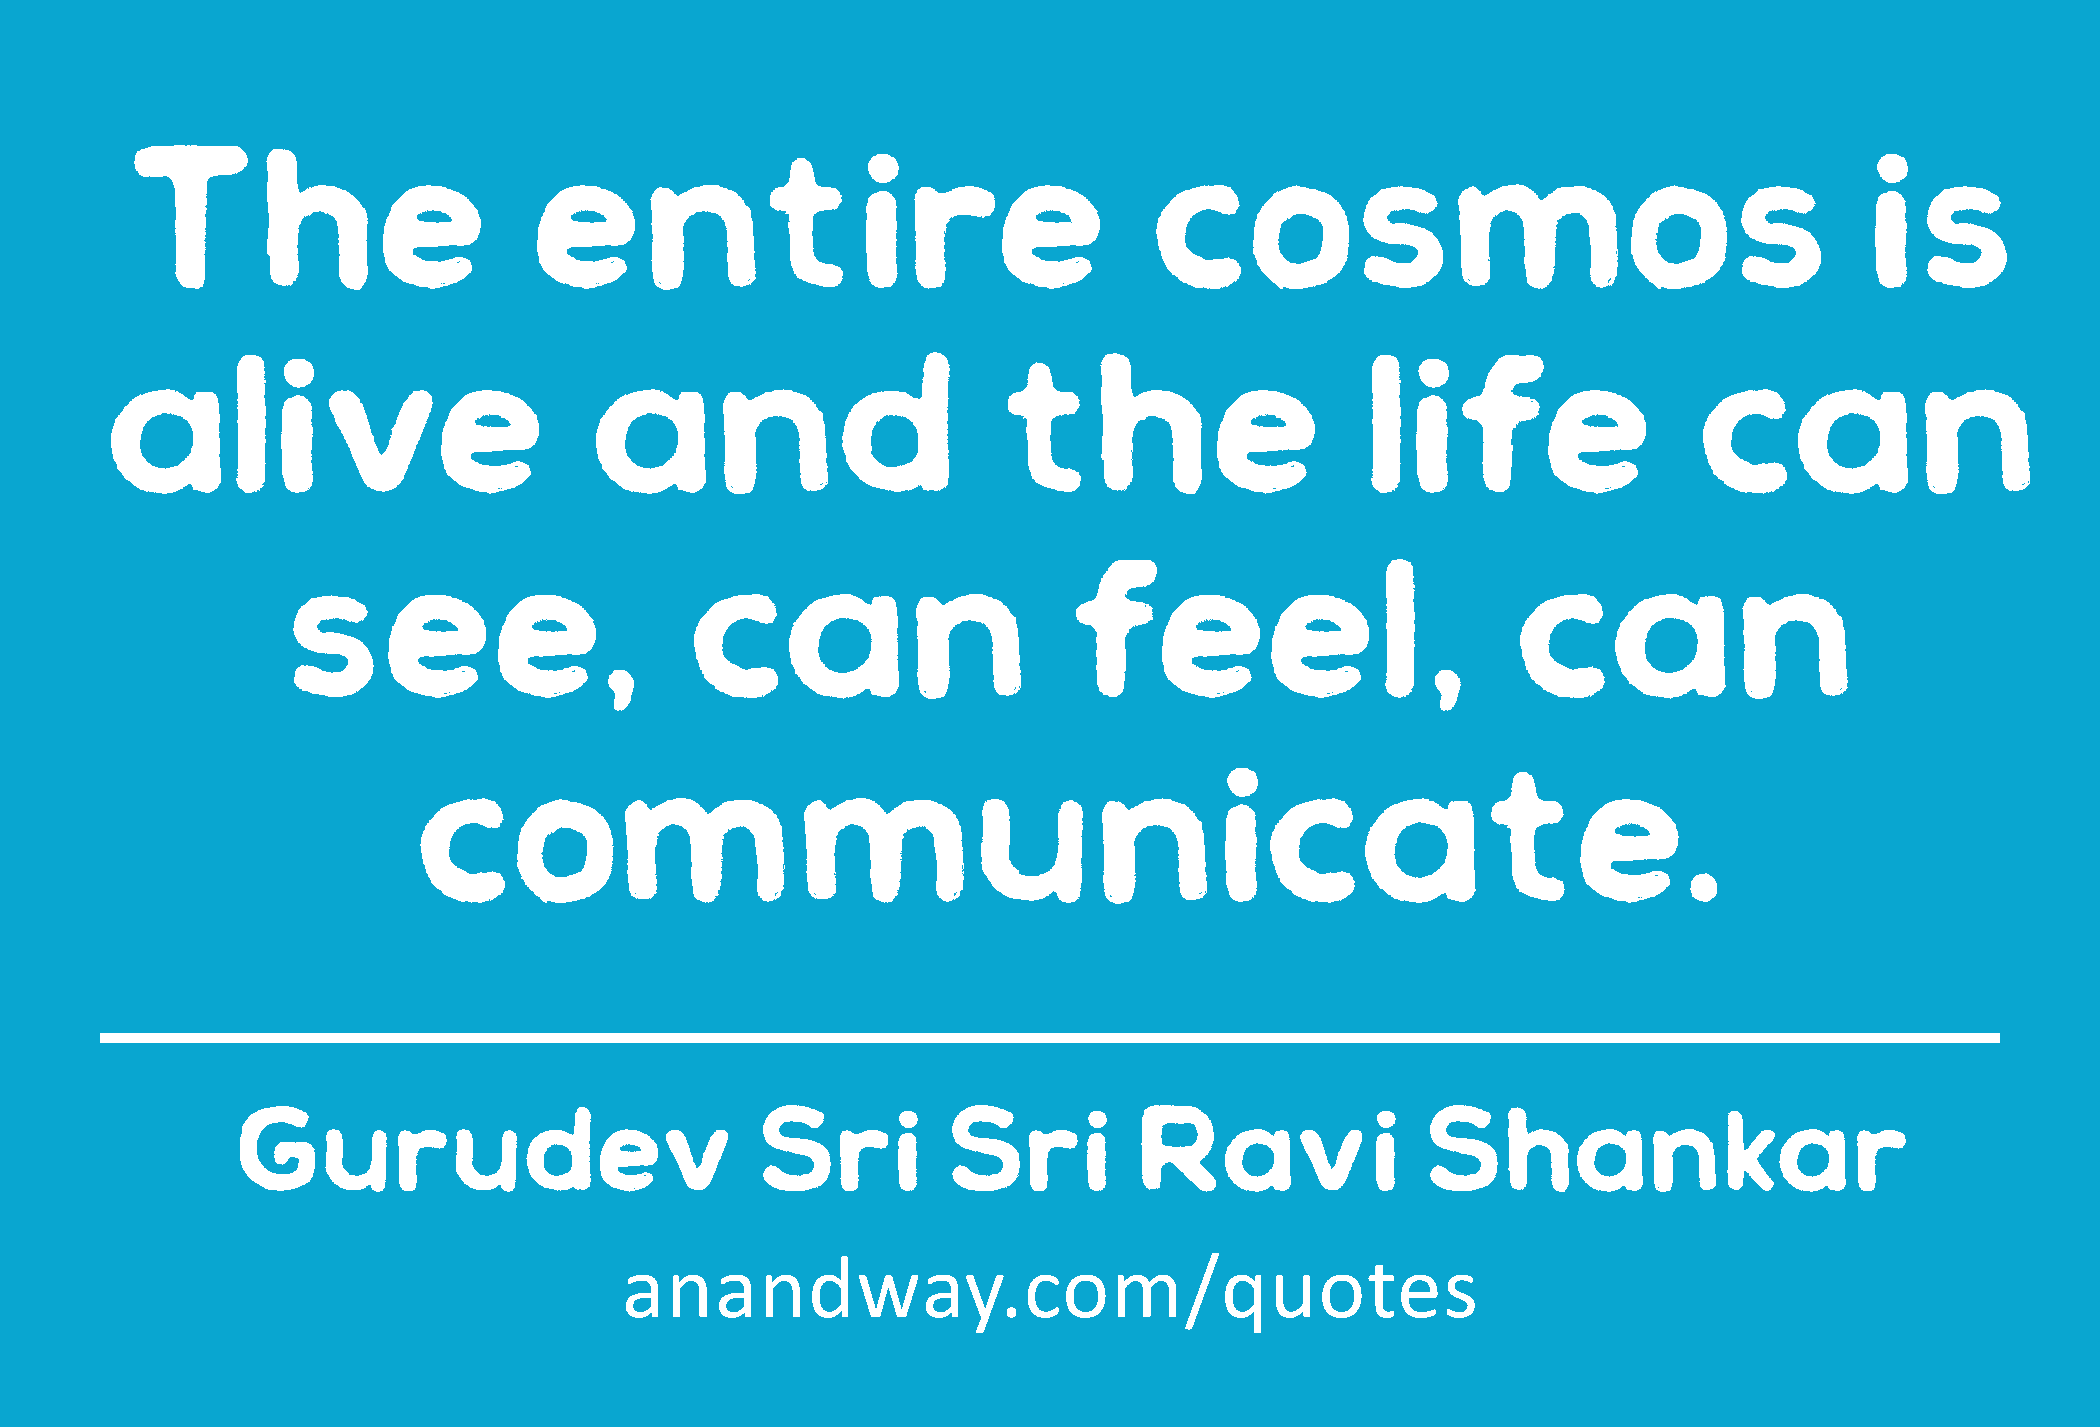 The entire cosmos is alive and the life can see, can feel, can communicate. 
 -Gurudev Sri Sri Ravi Shankar